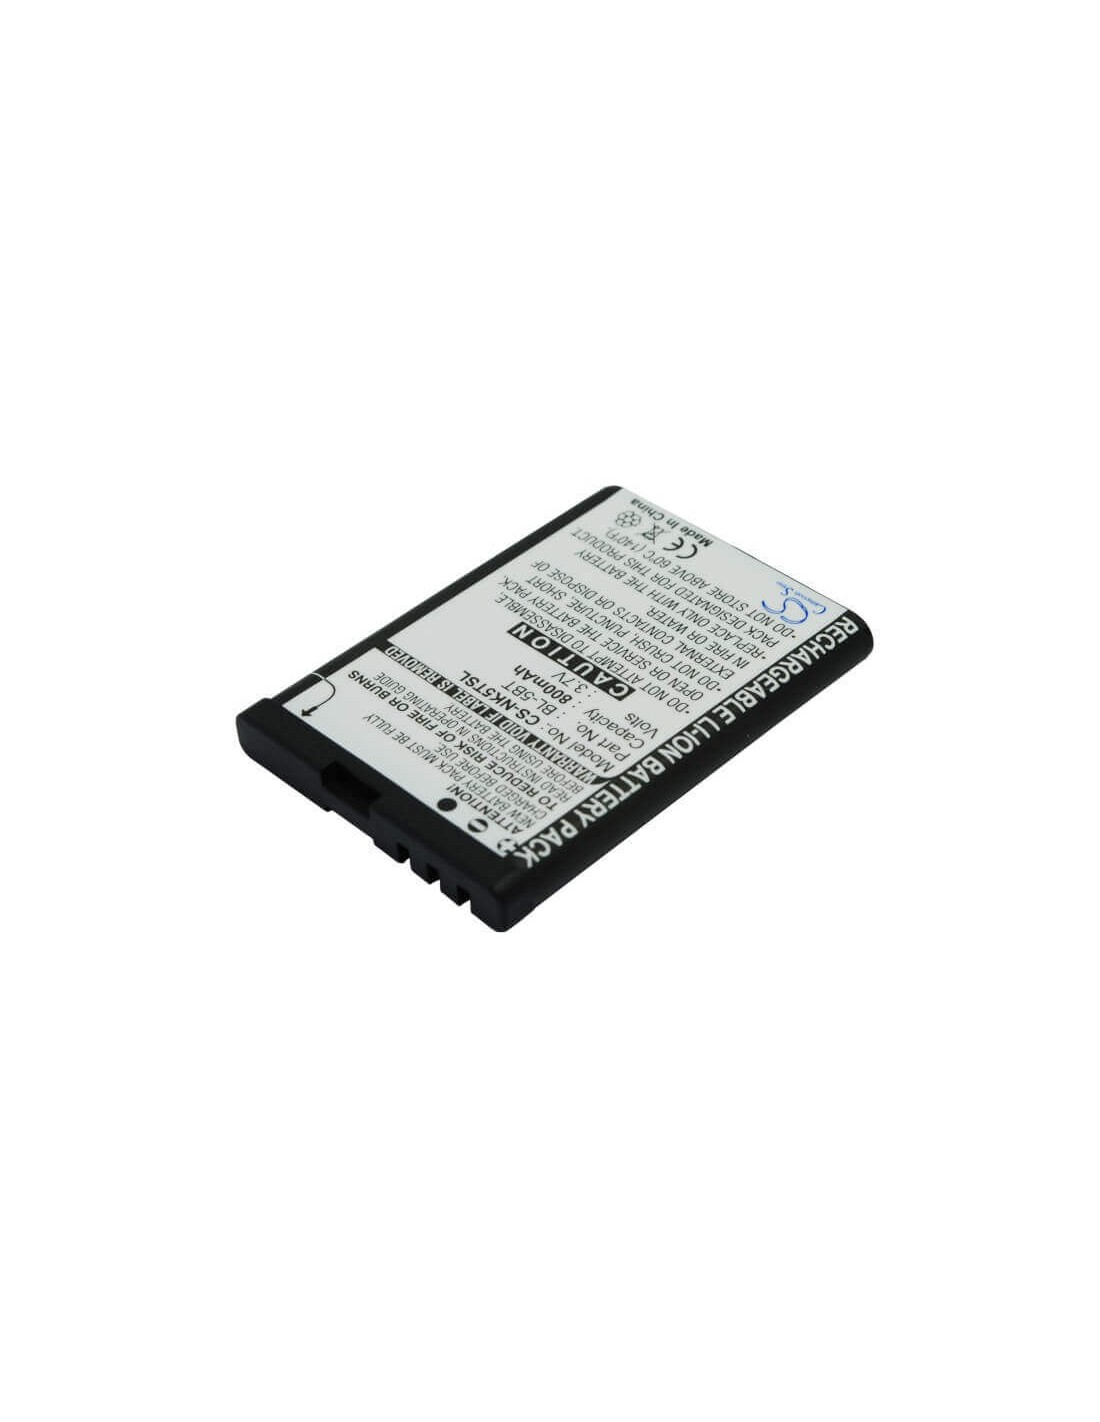 Battery for Nokia N75, 7510, 2600 classic 3.7V, 800mAh - 2.96Wh